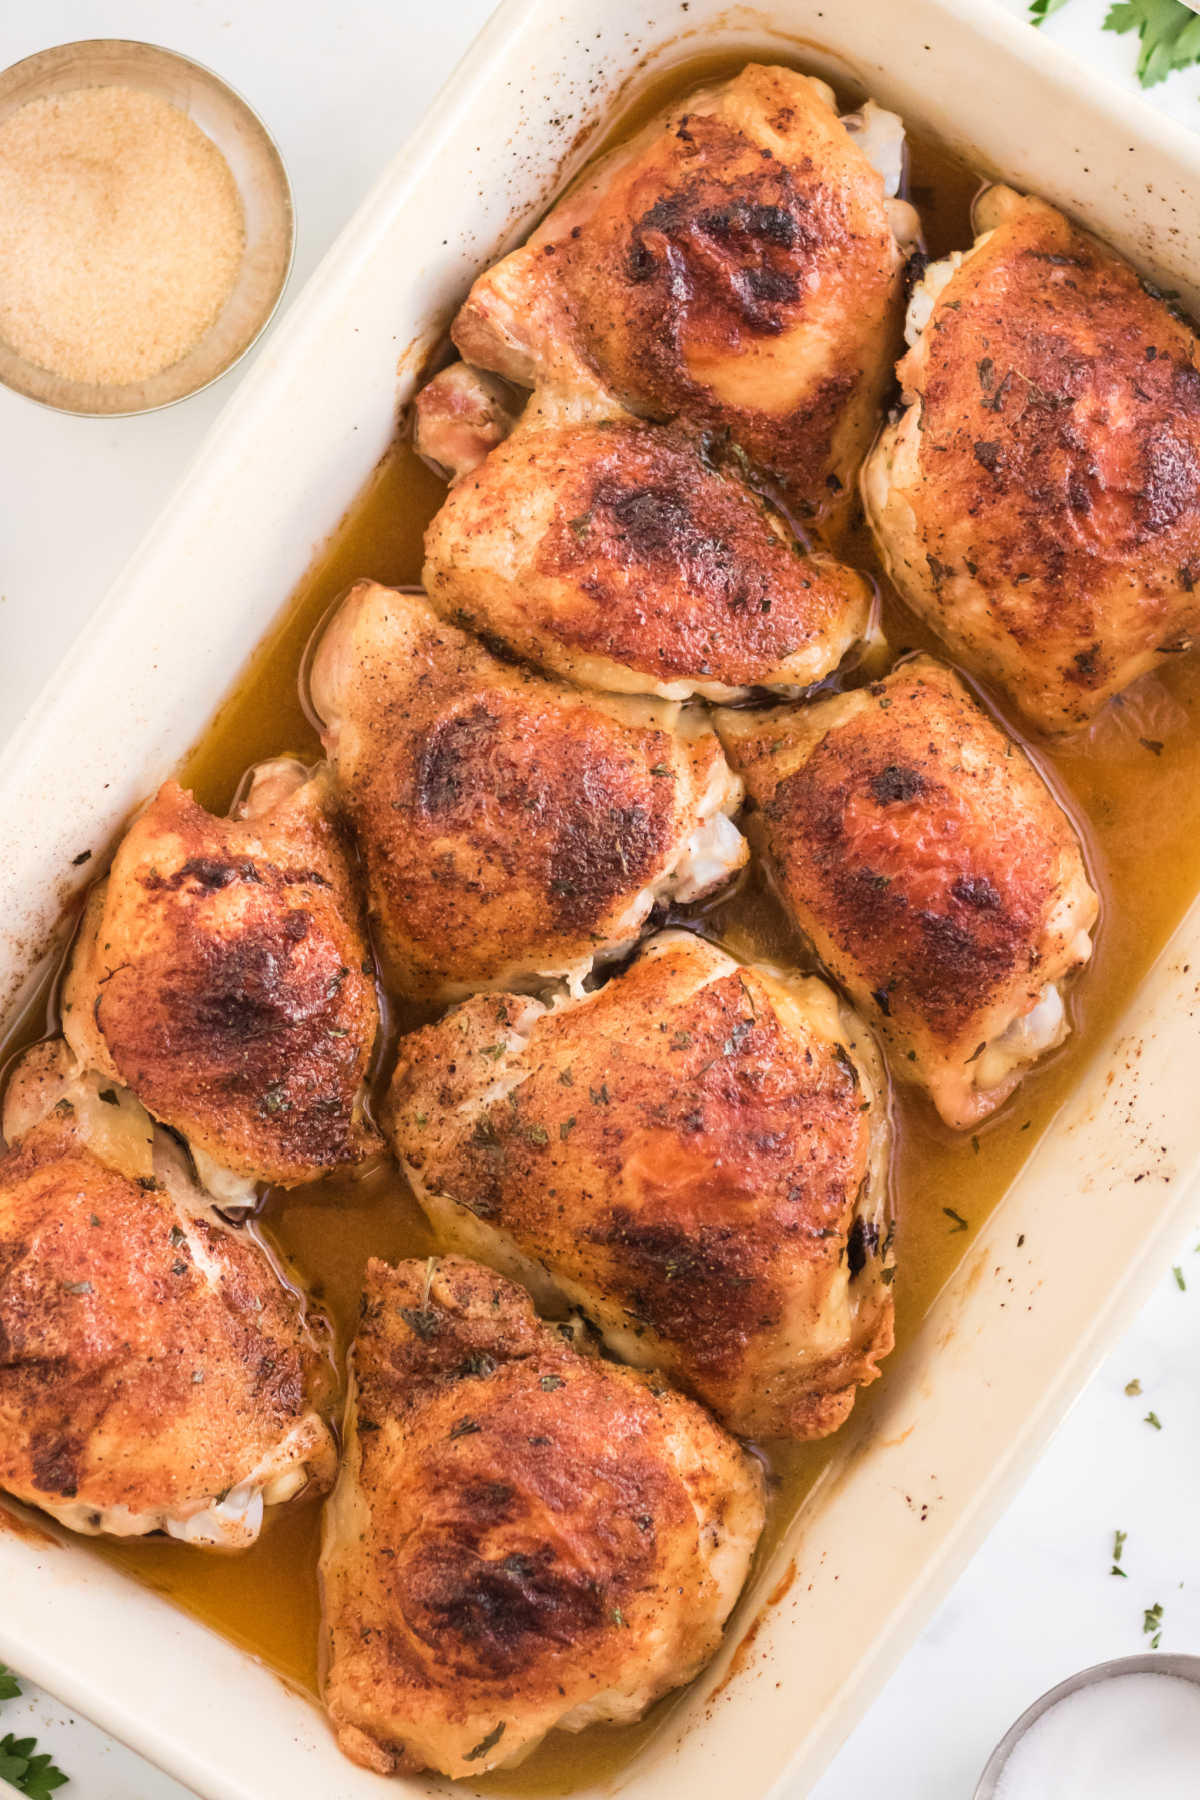 Easy Oven Baked Chicken Thighs in just 35 minutes!